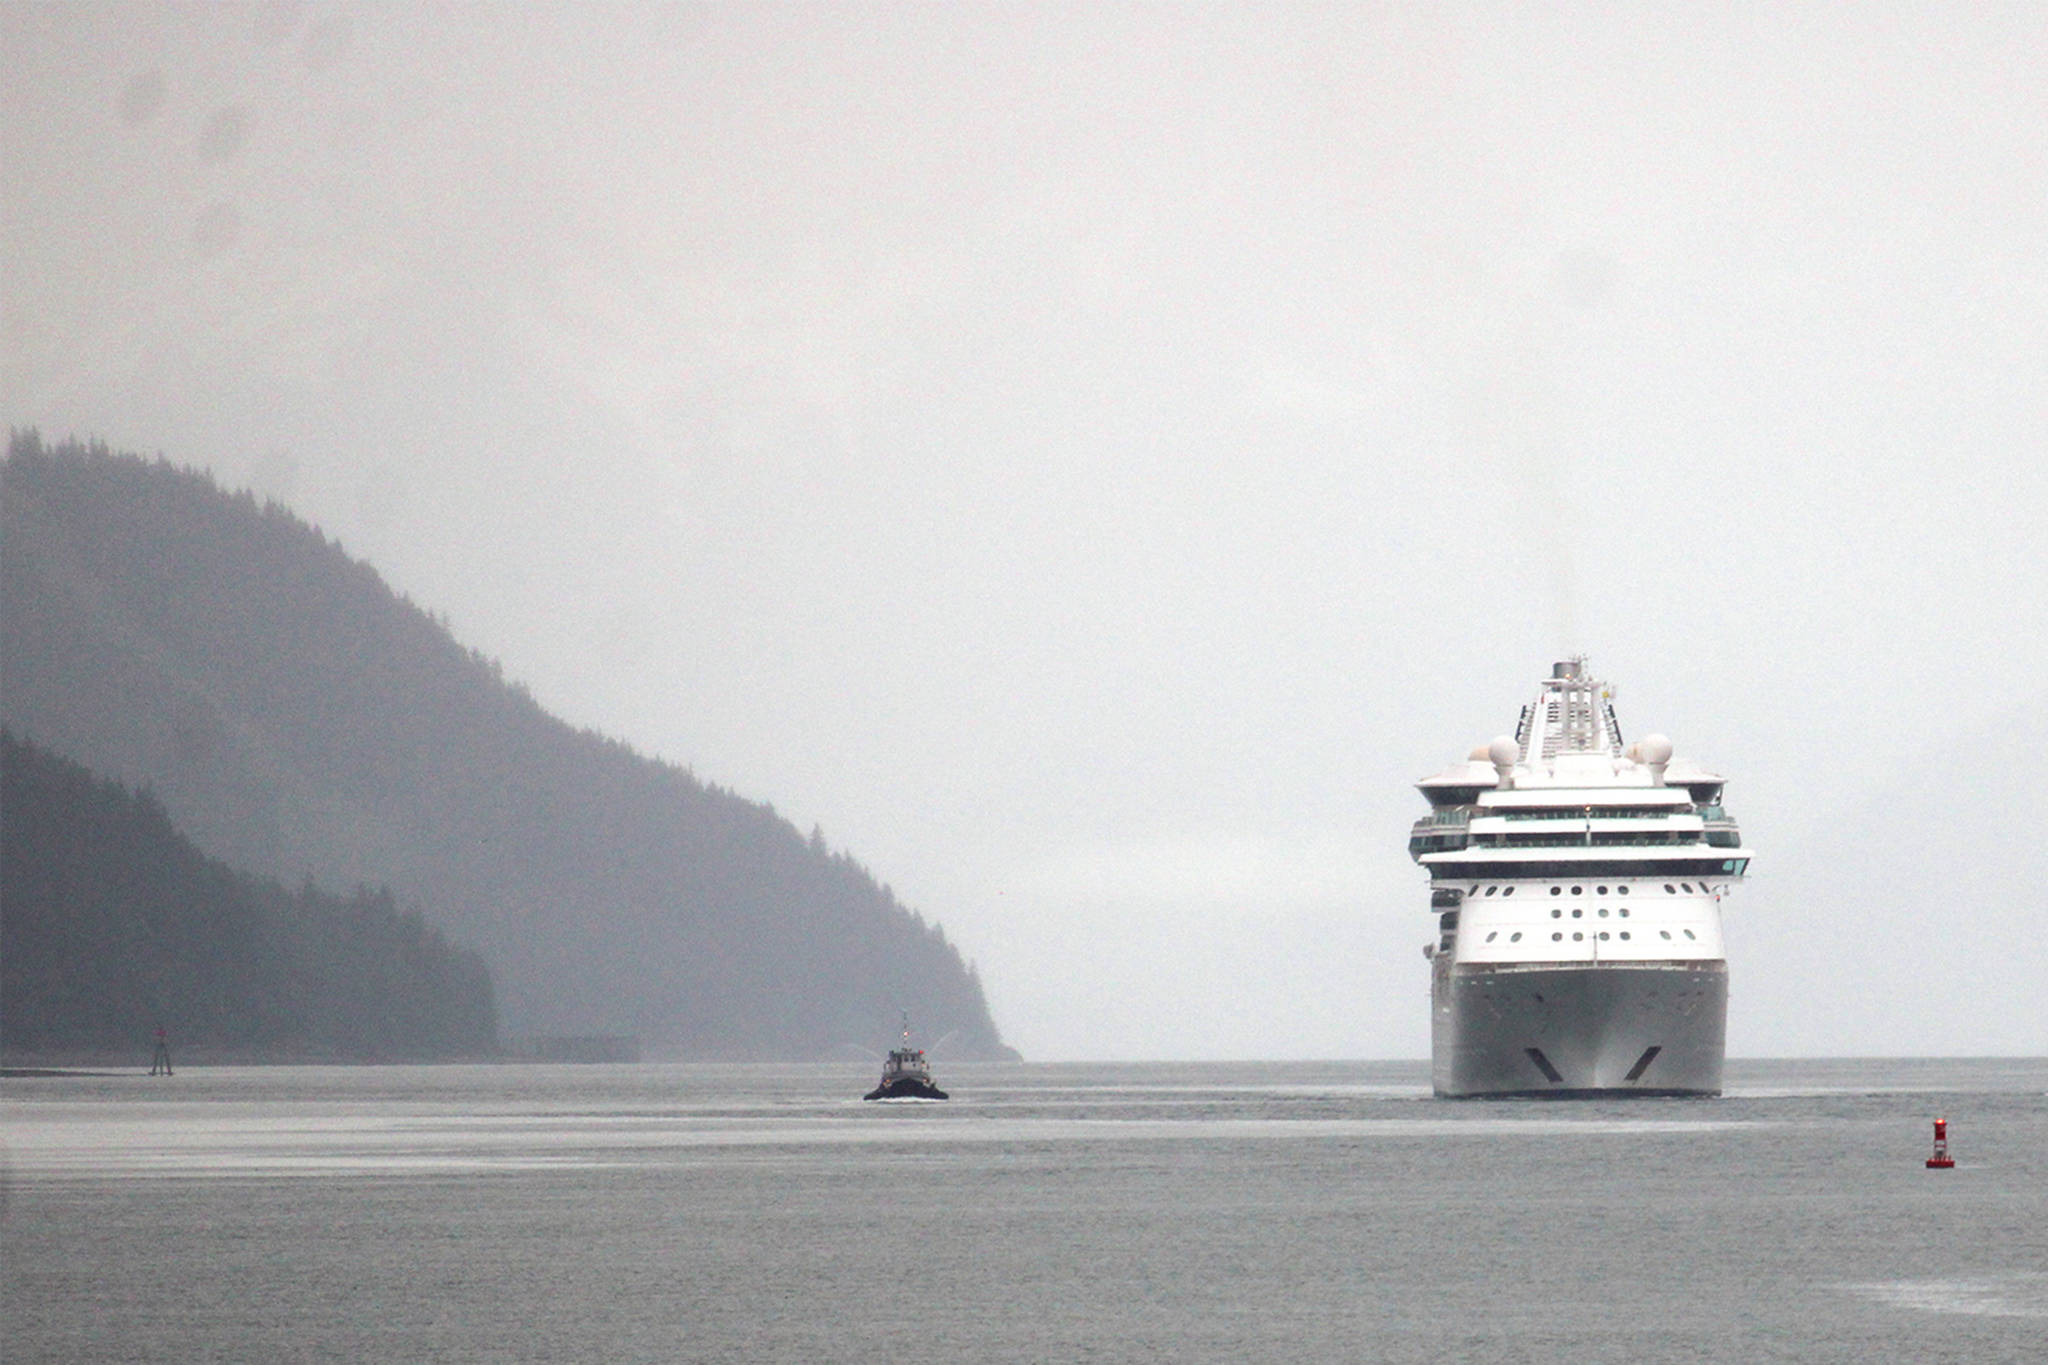 Dana Zigmund / Juneau Empire
The Serenade of the Seas arrives in Juneau early Friday morning. The Royal Caribbean cruise ship is the first large cruise ship to come to Juneau since the pandemic caused the cancellation of the 2020 cruise ship season and delayed the 2021 season.